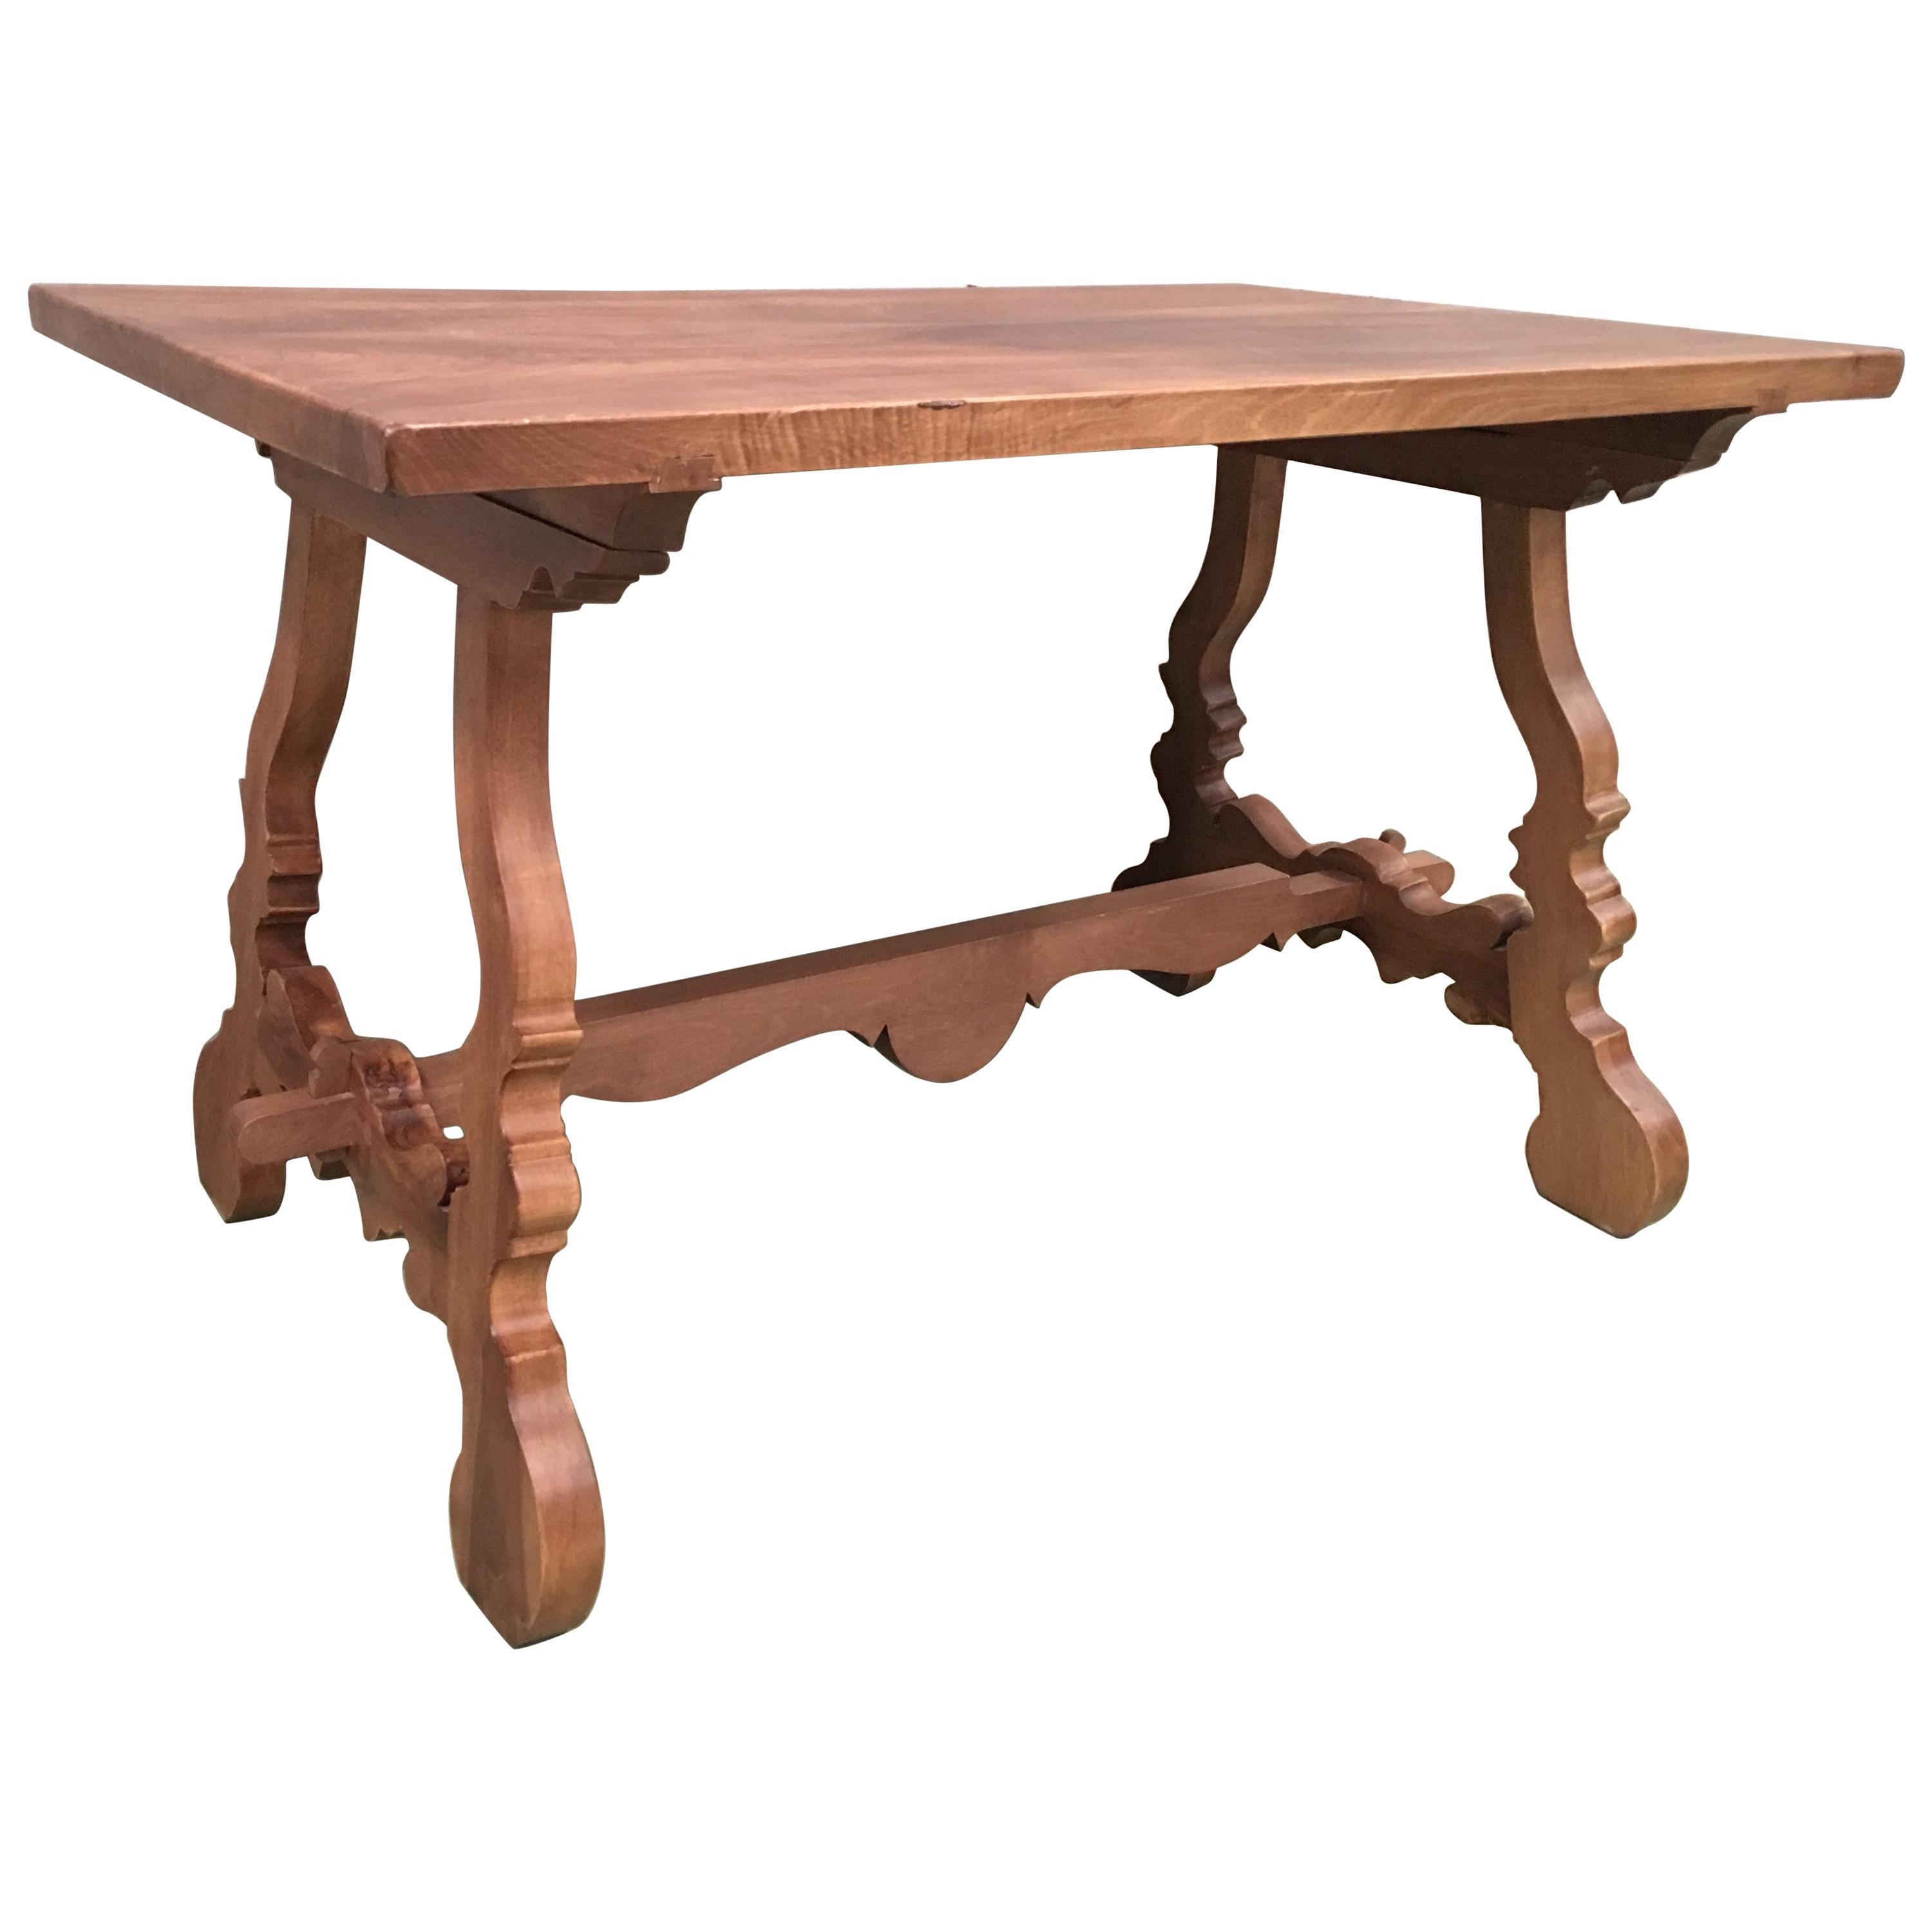 Early 20th Century Spanish Pine Trestle Table with Wood Stretcher